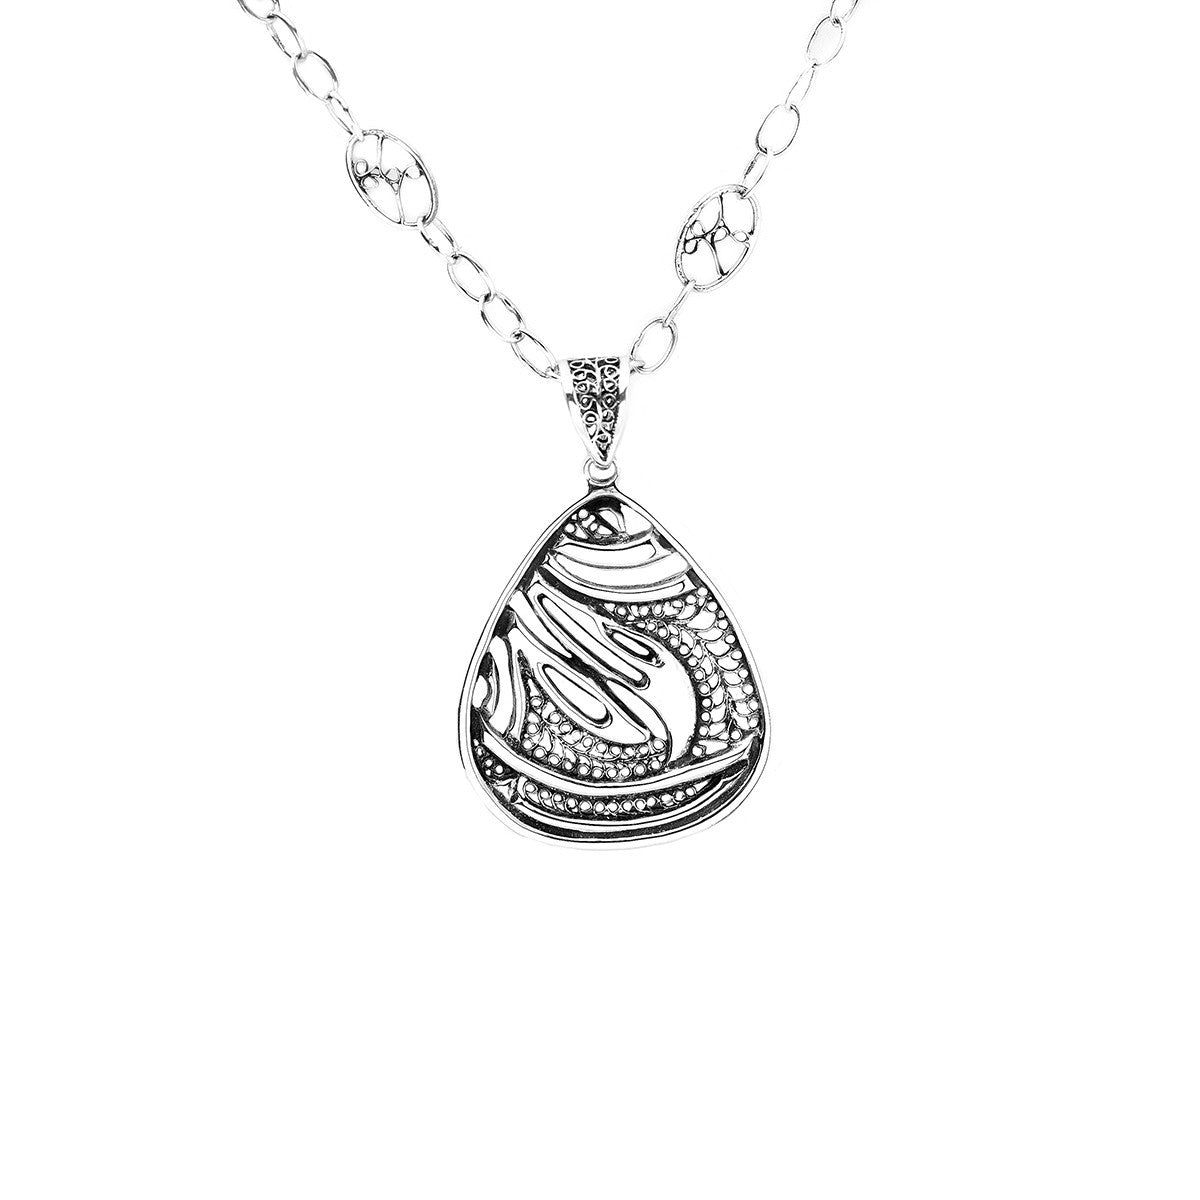 Belle Nouveau Teardrop Sterling Silver Necklace - Cynthia Gale New York Jewelry